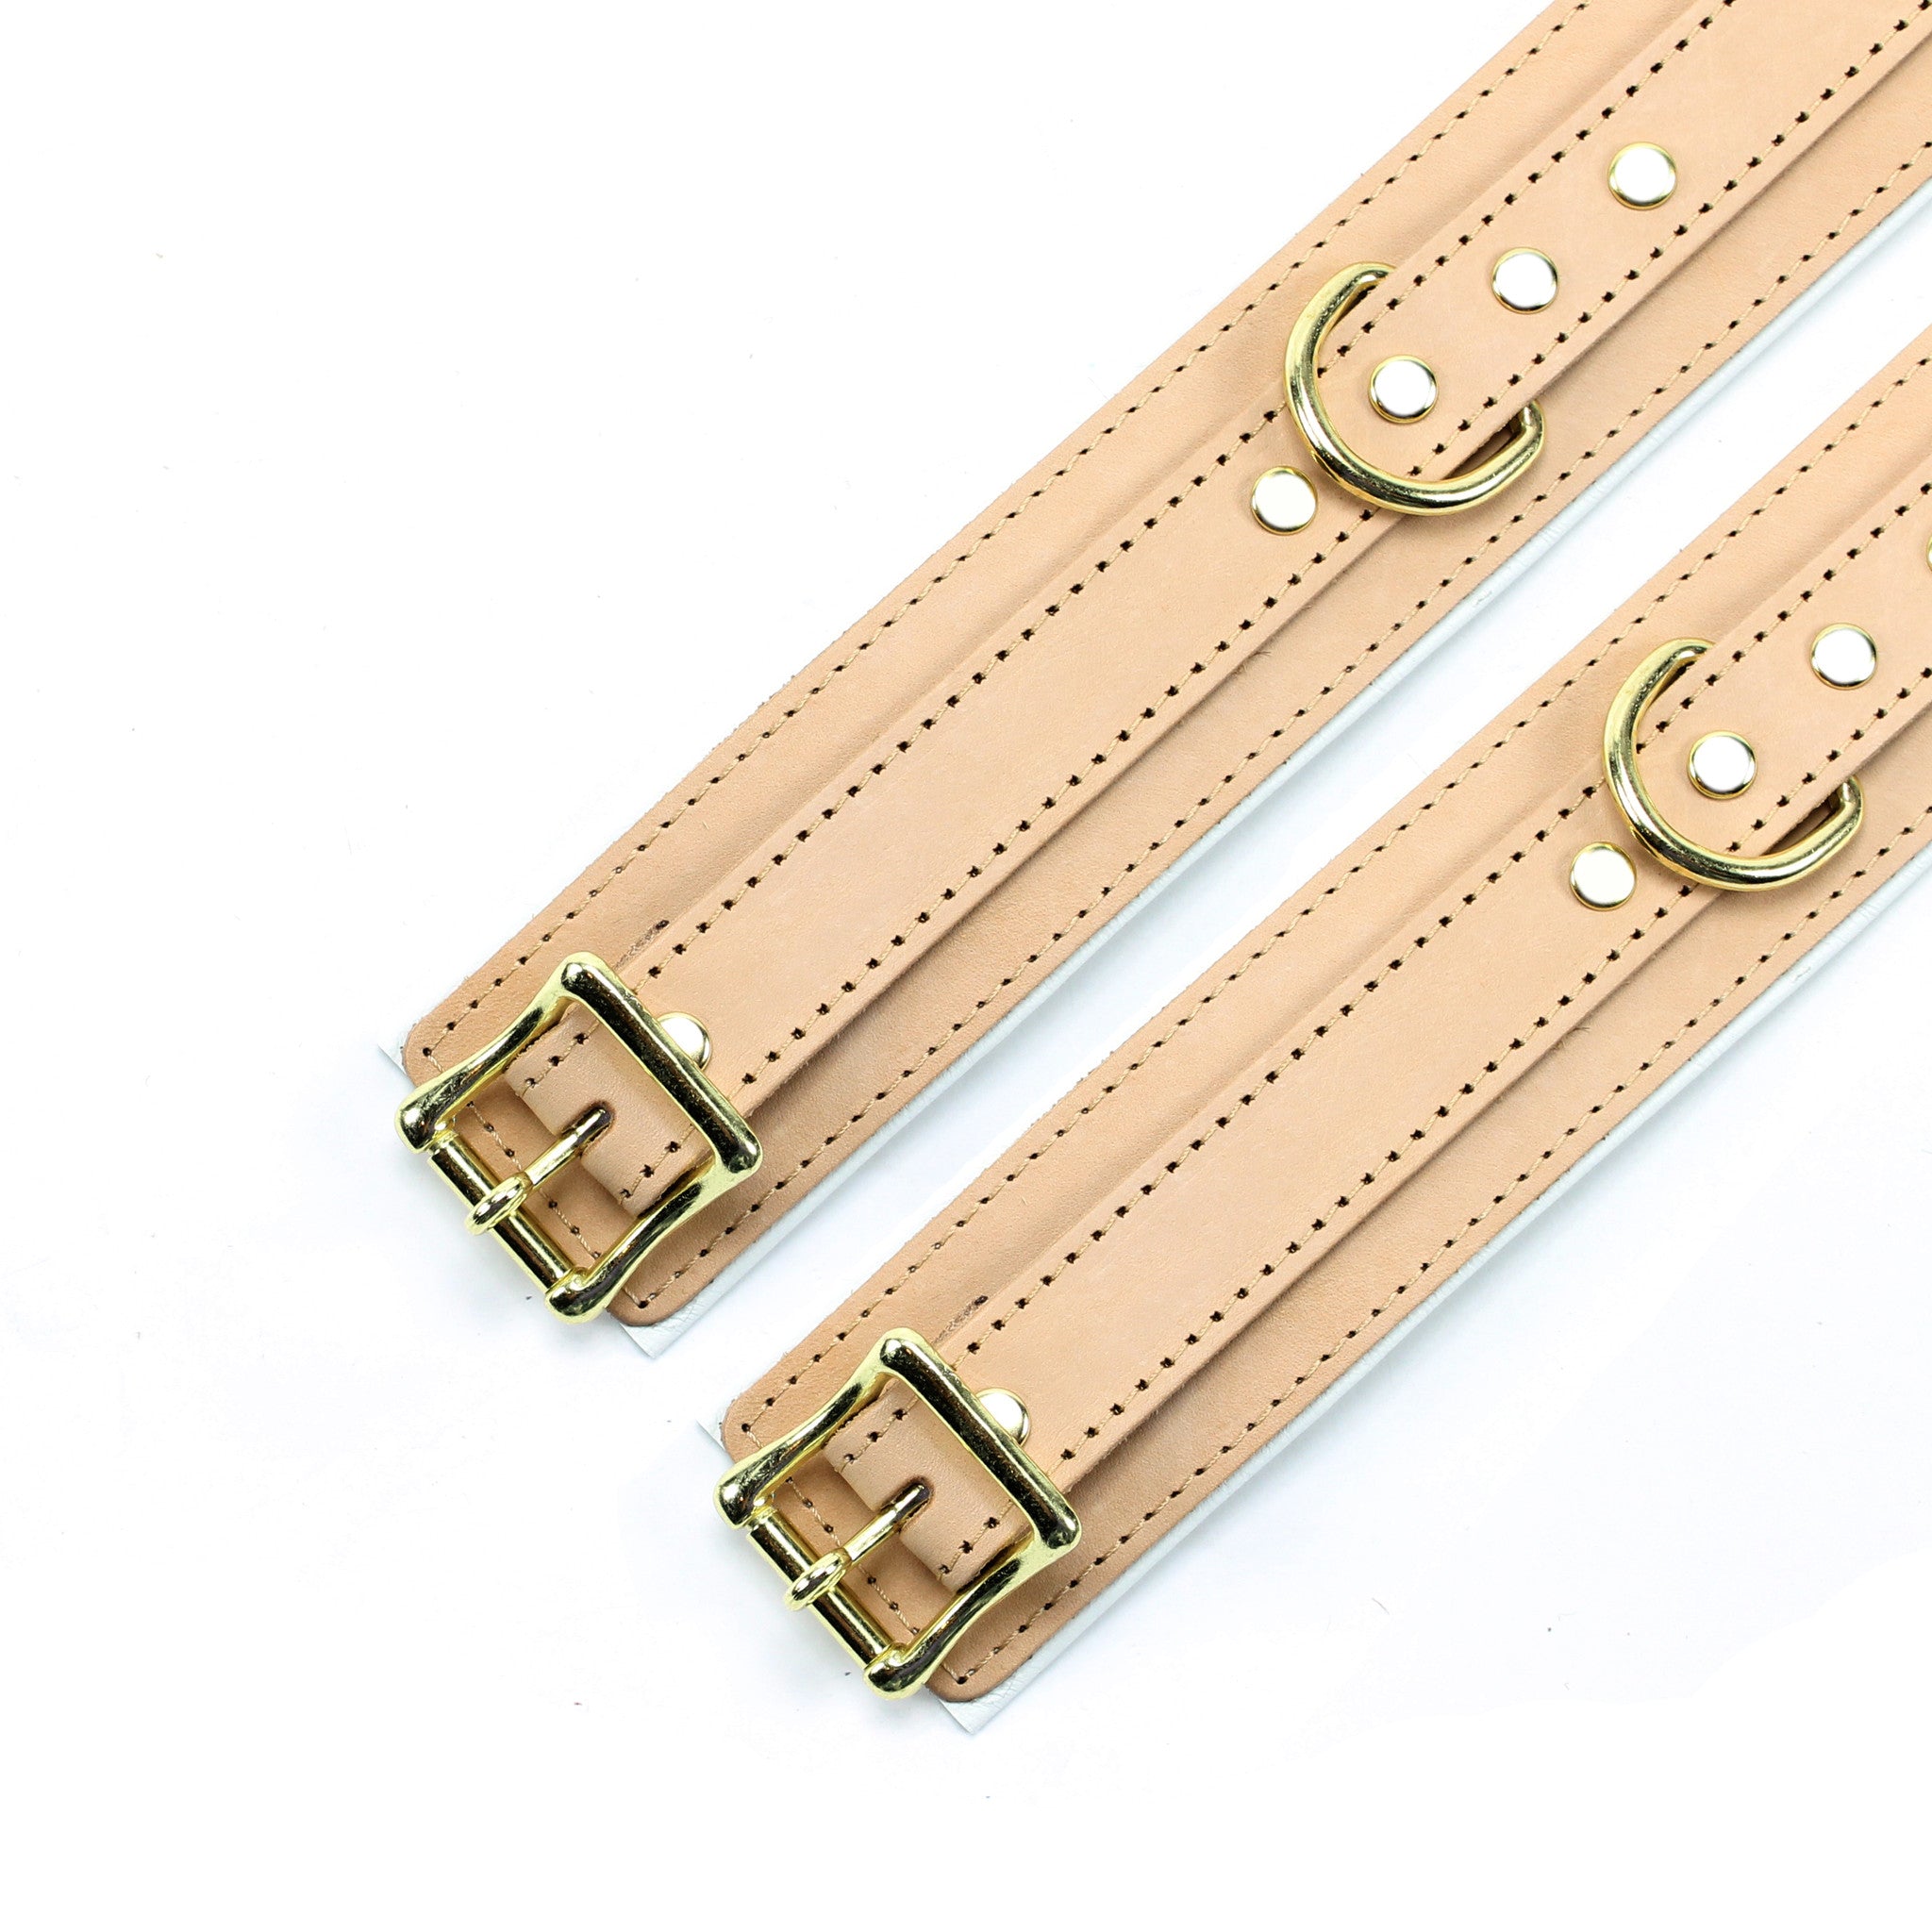 Galen nude leather medical restrains with gold-plated hardware